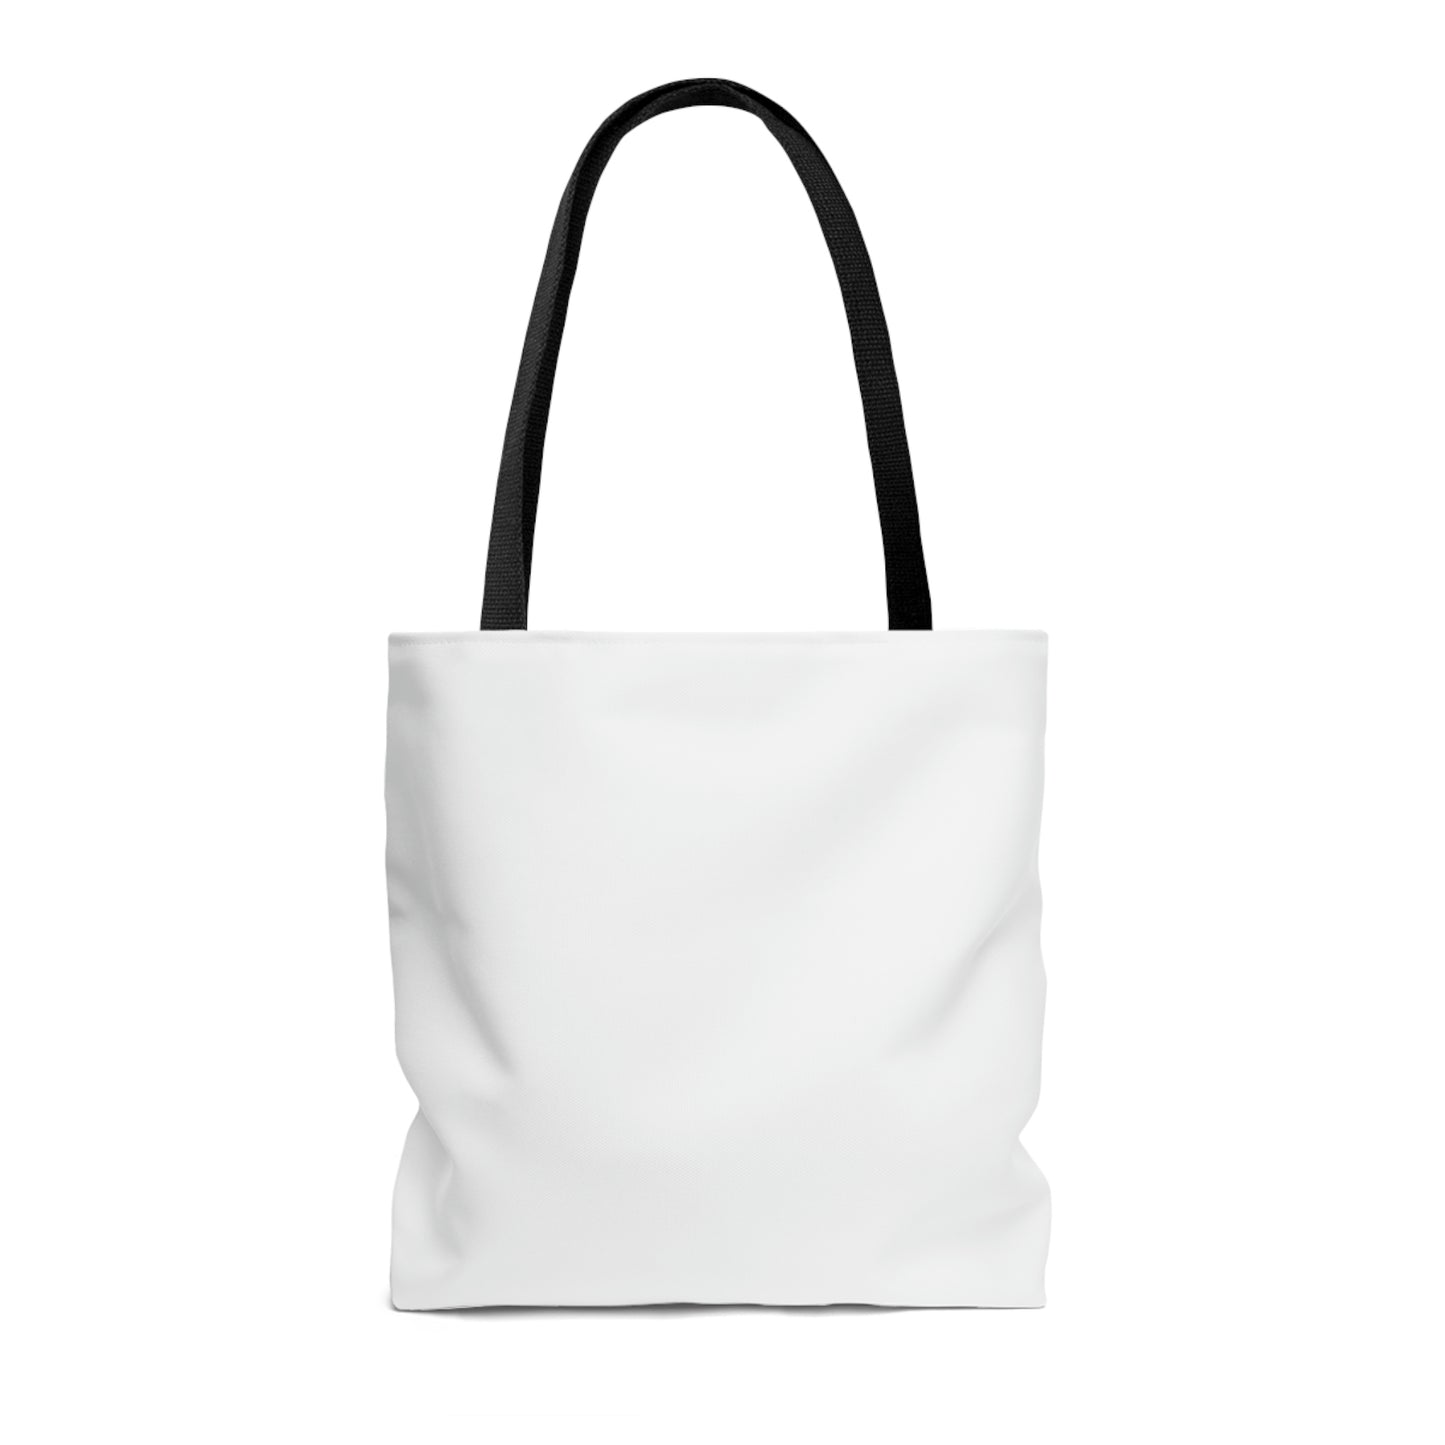 White Tote Bag Be Brave, Be Beautiful